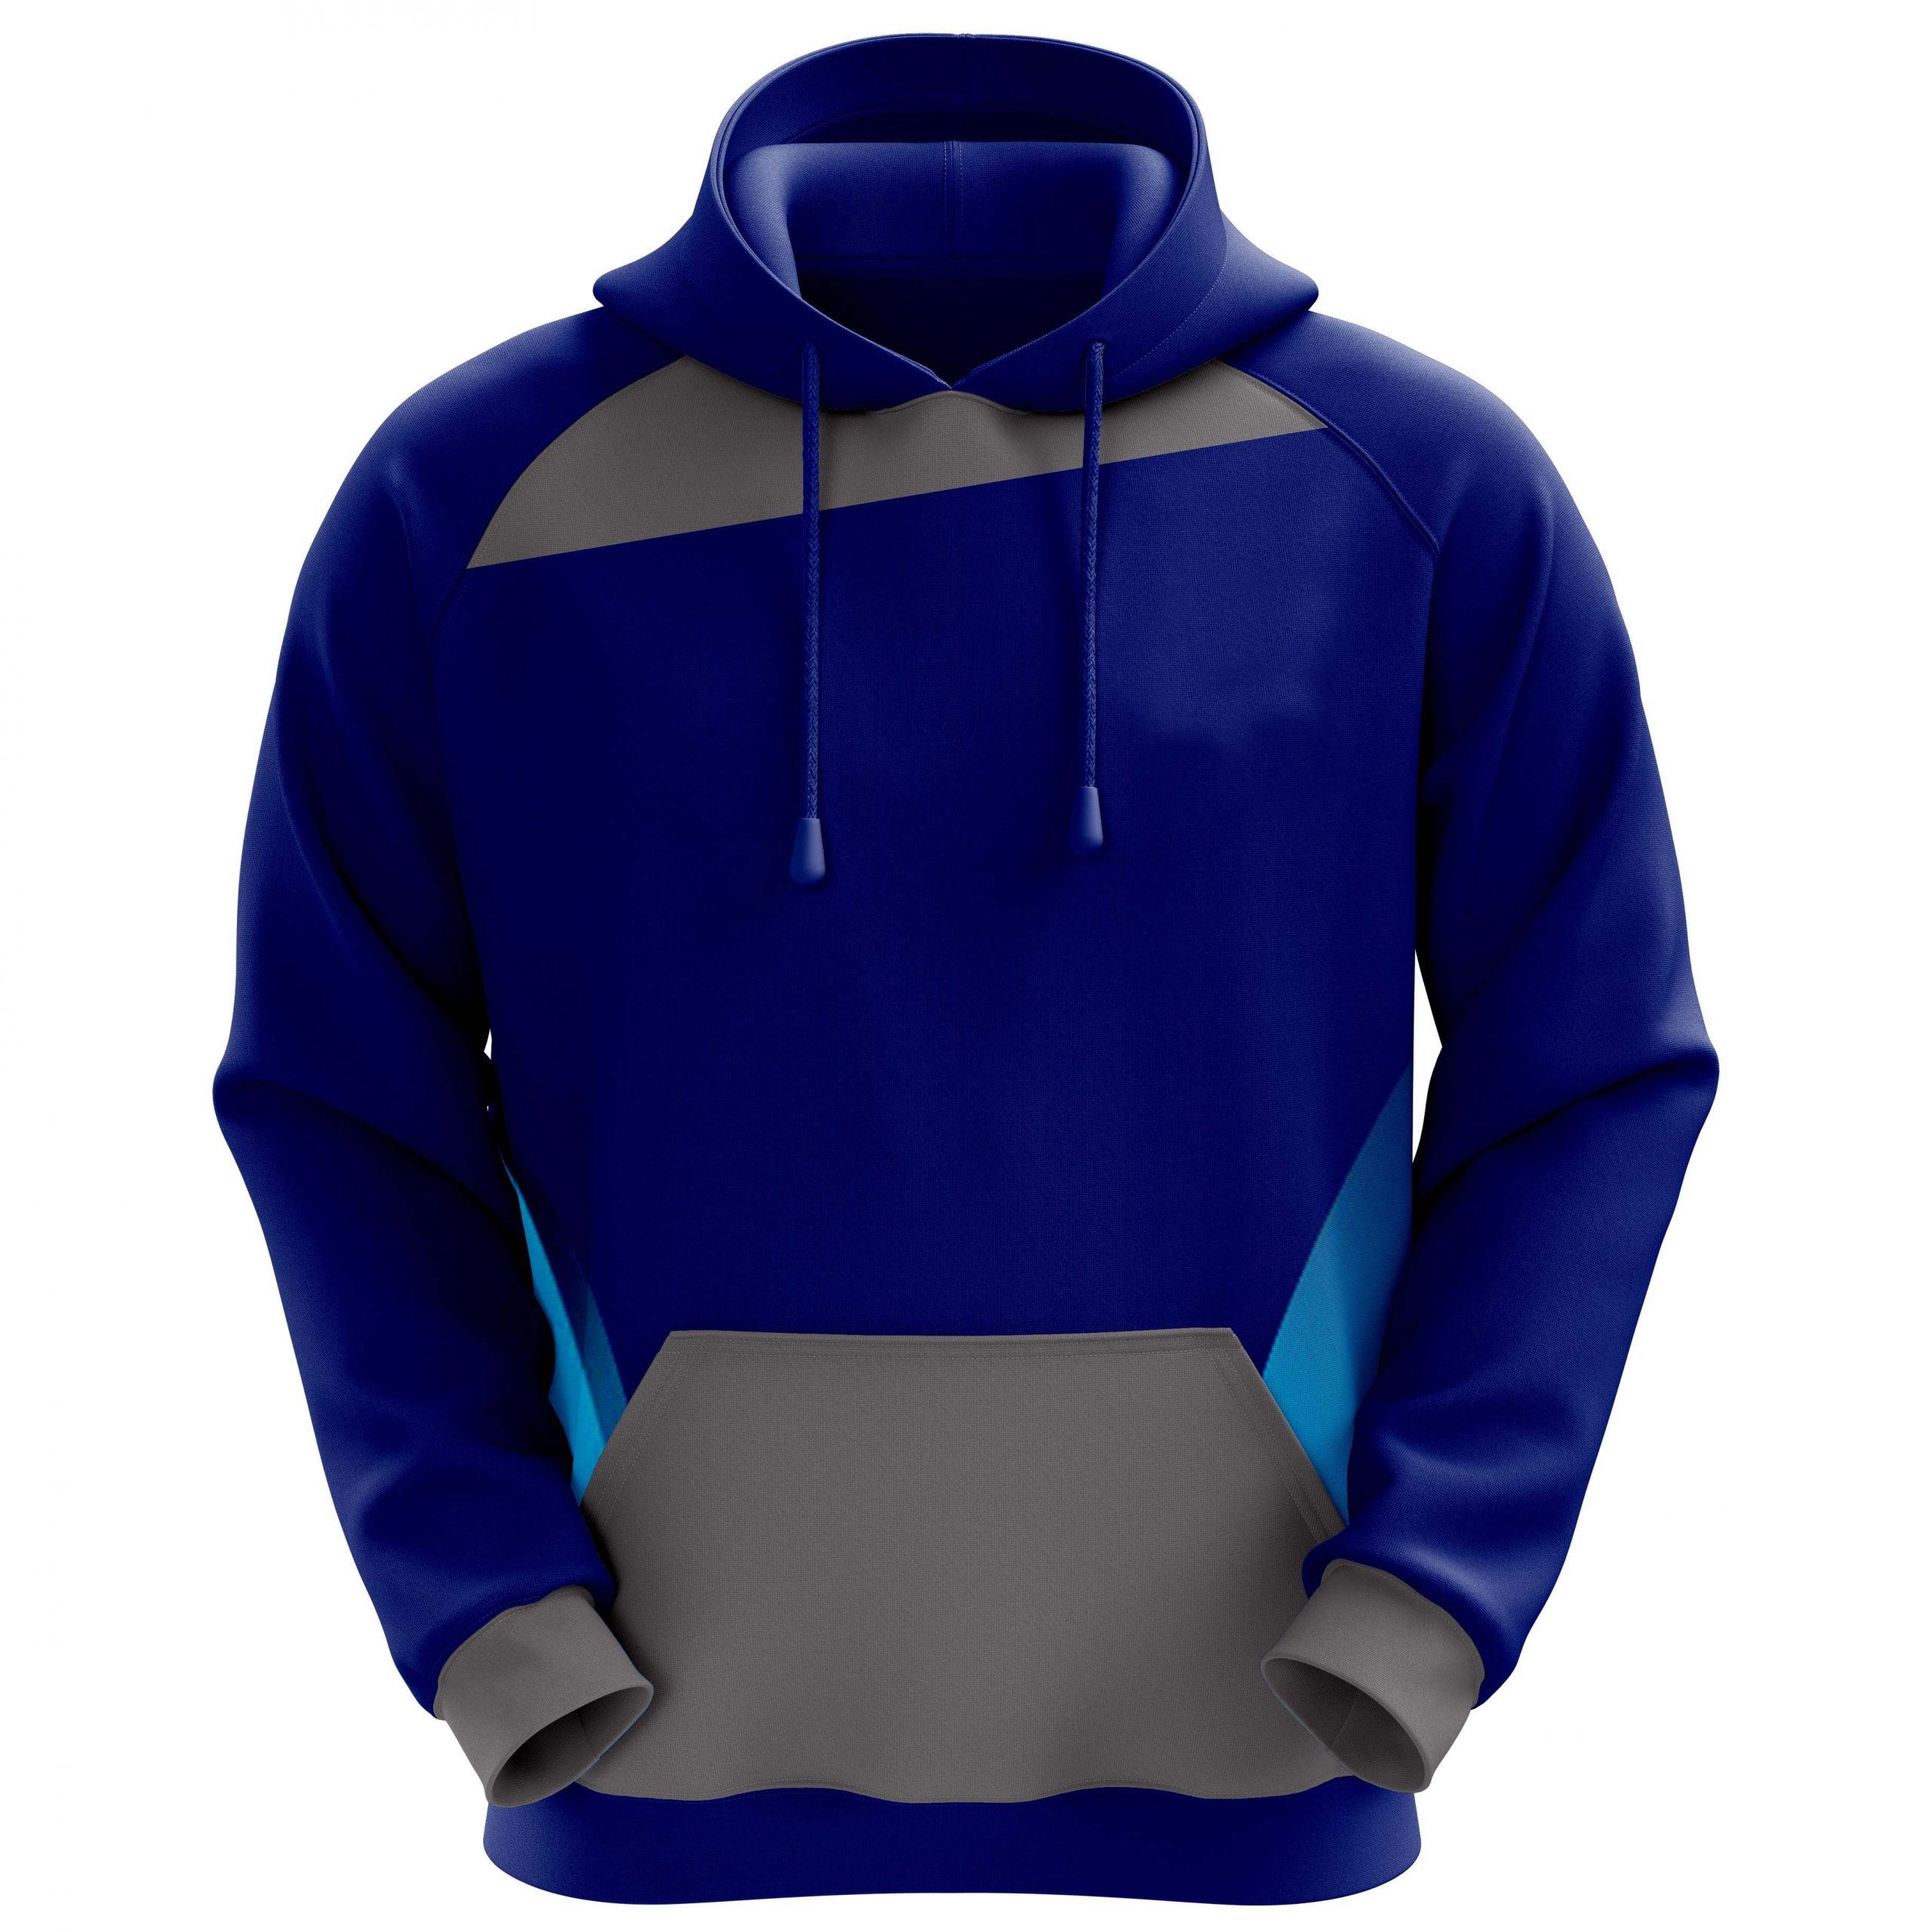 Customize Printed Hoodie Oversize Pullover Unisex blank Polyester sublimation  hoodie for men